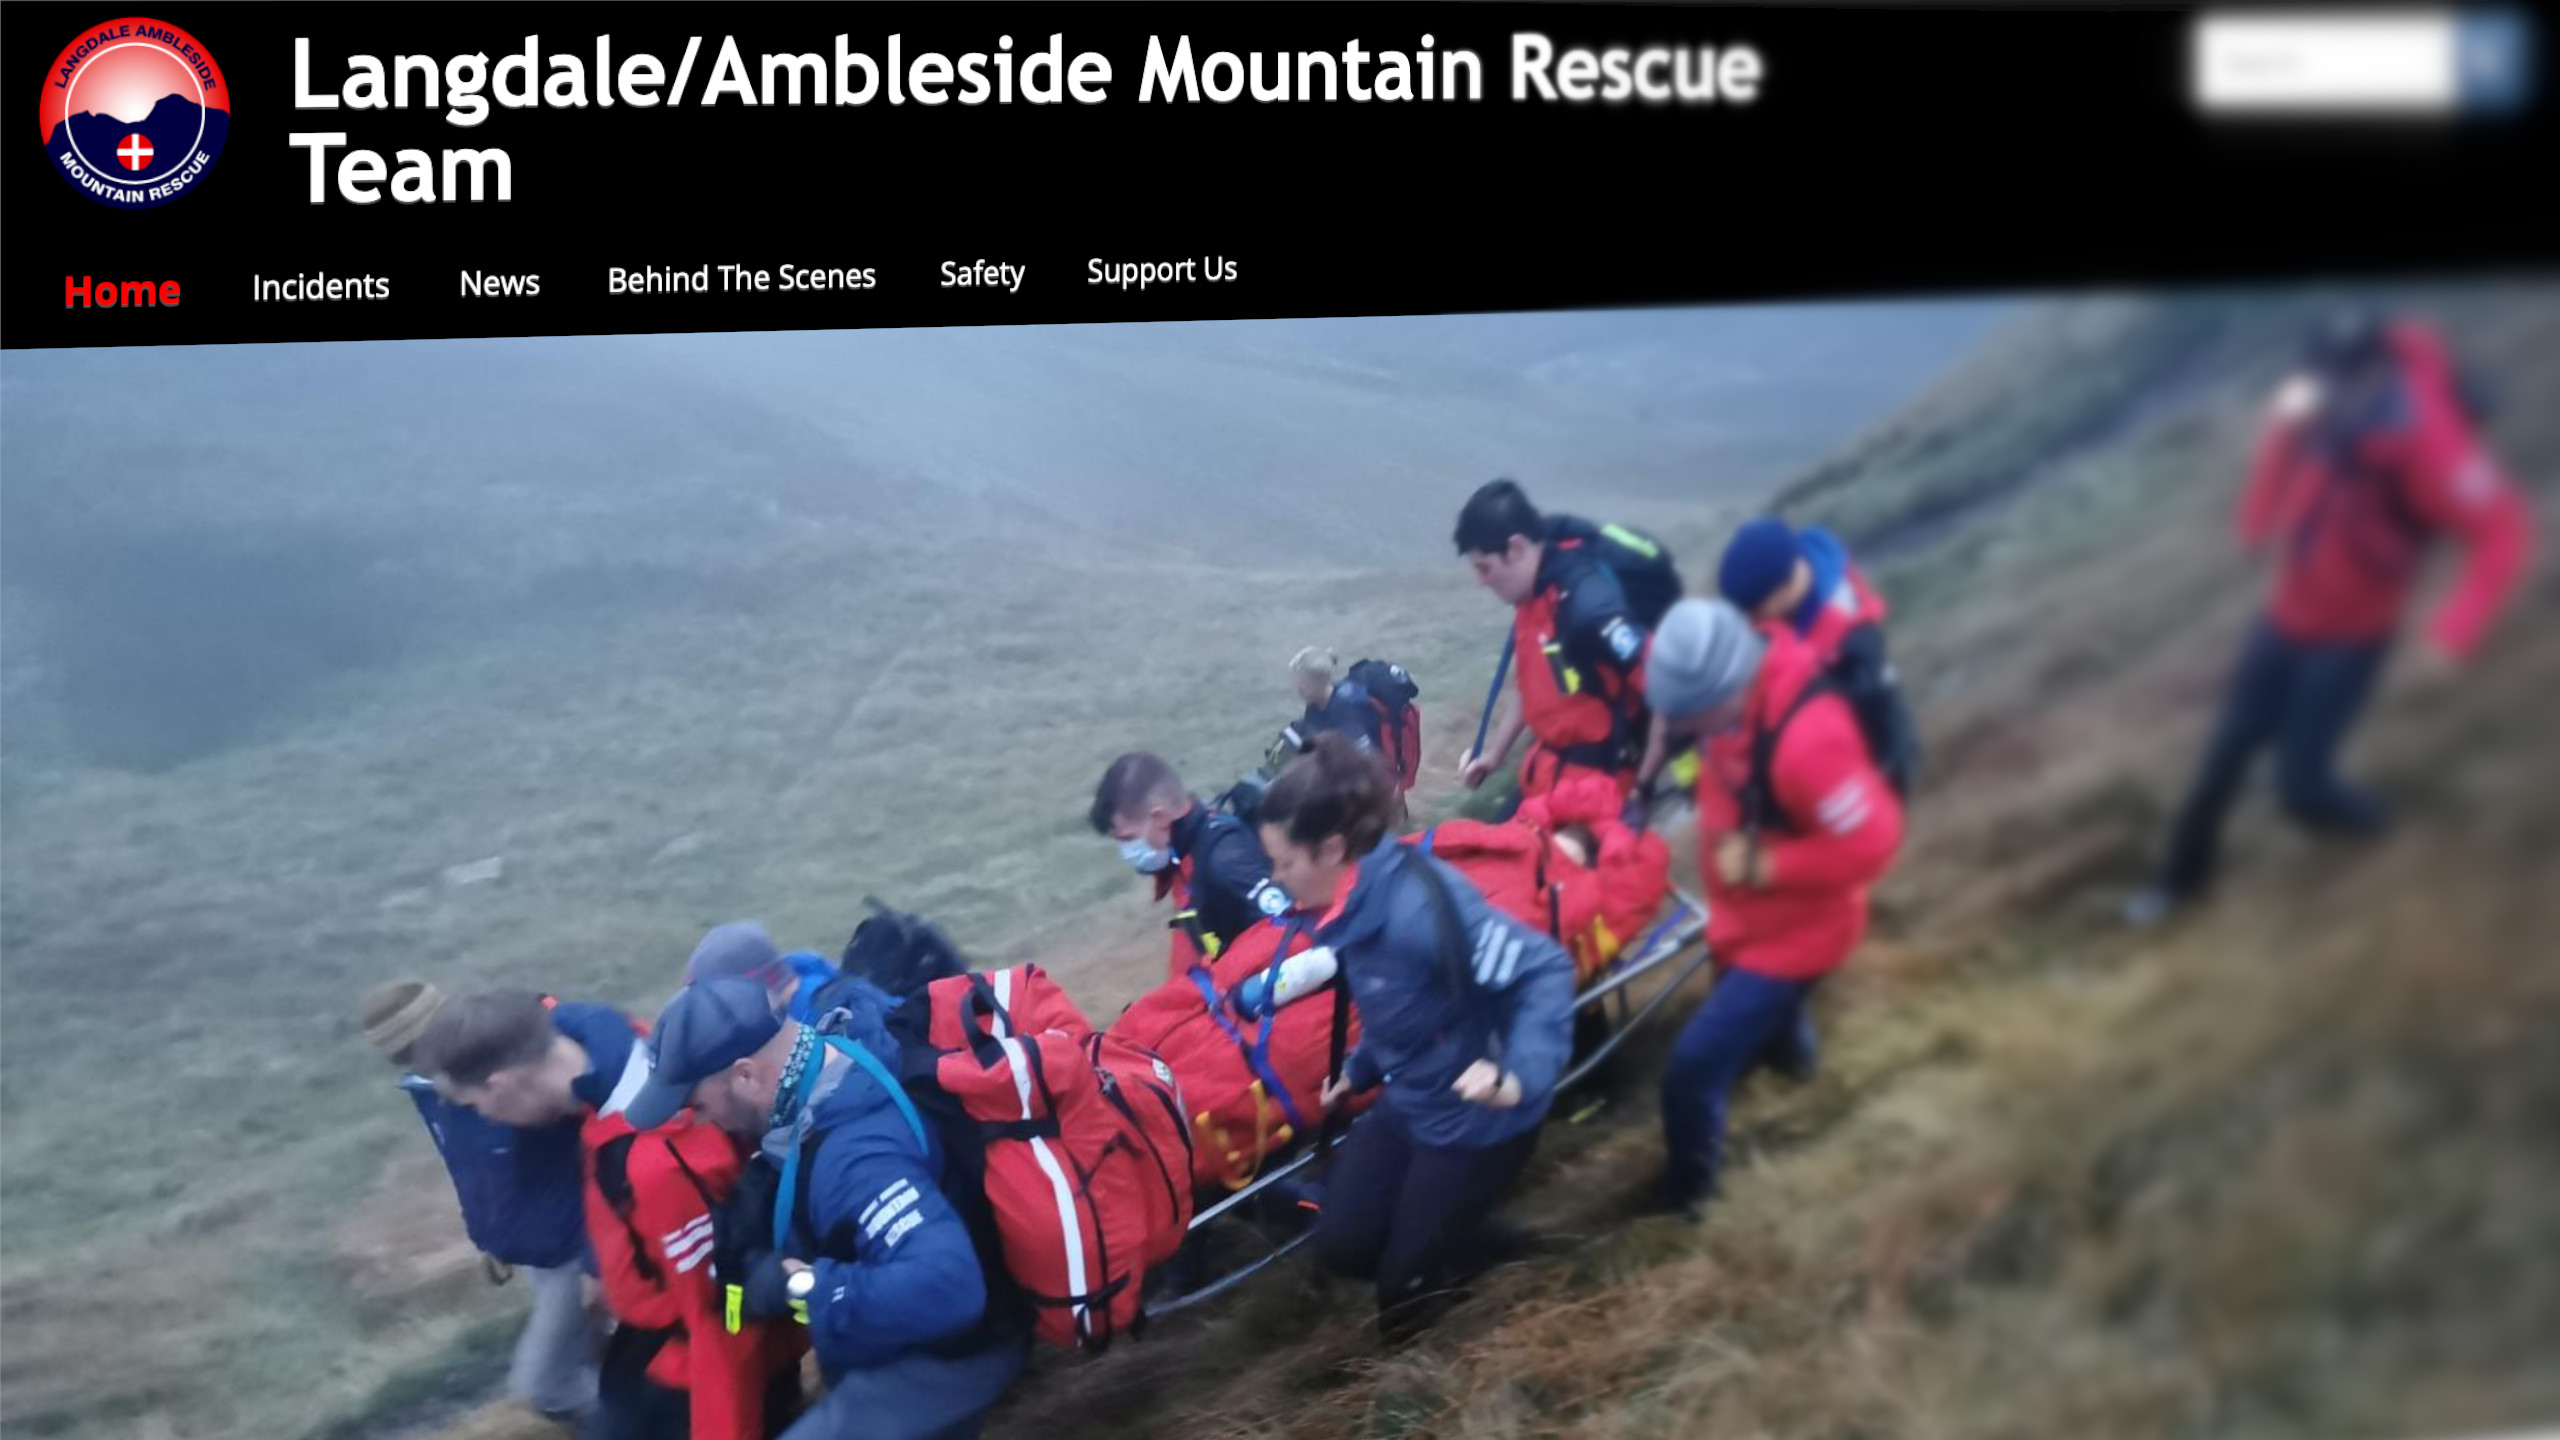 Langdale/Ambleside Mountain Rescue Team - Drupal Upgrade and Support